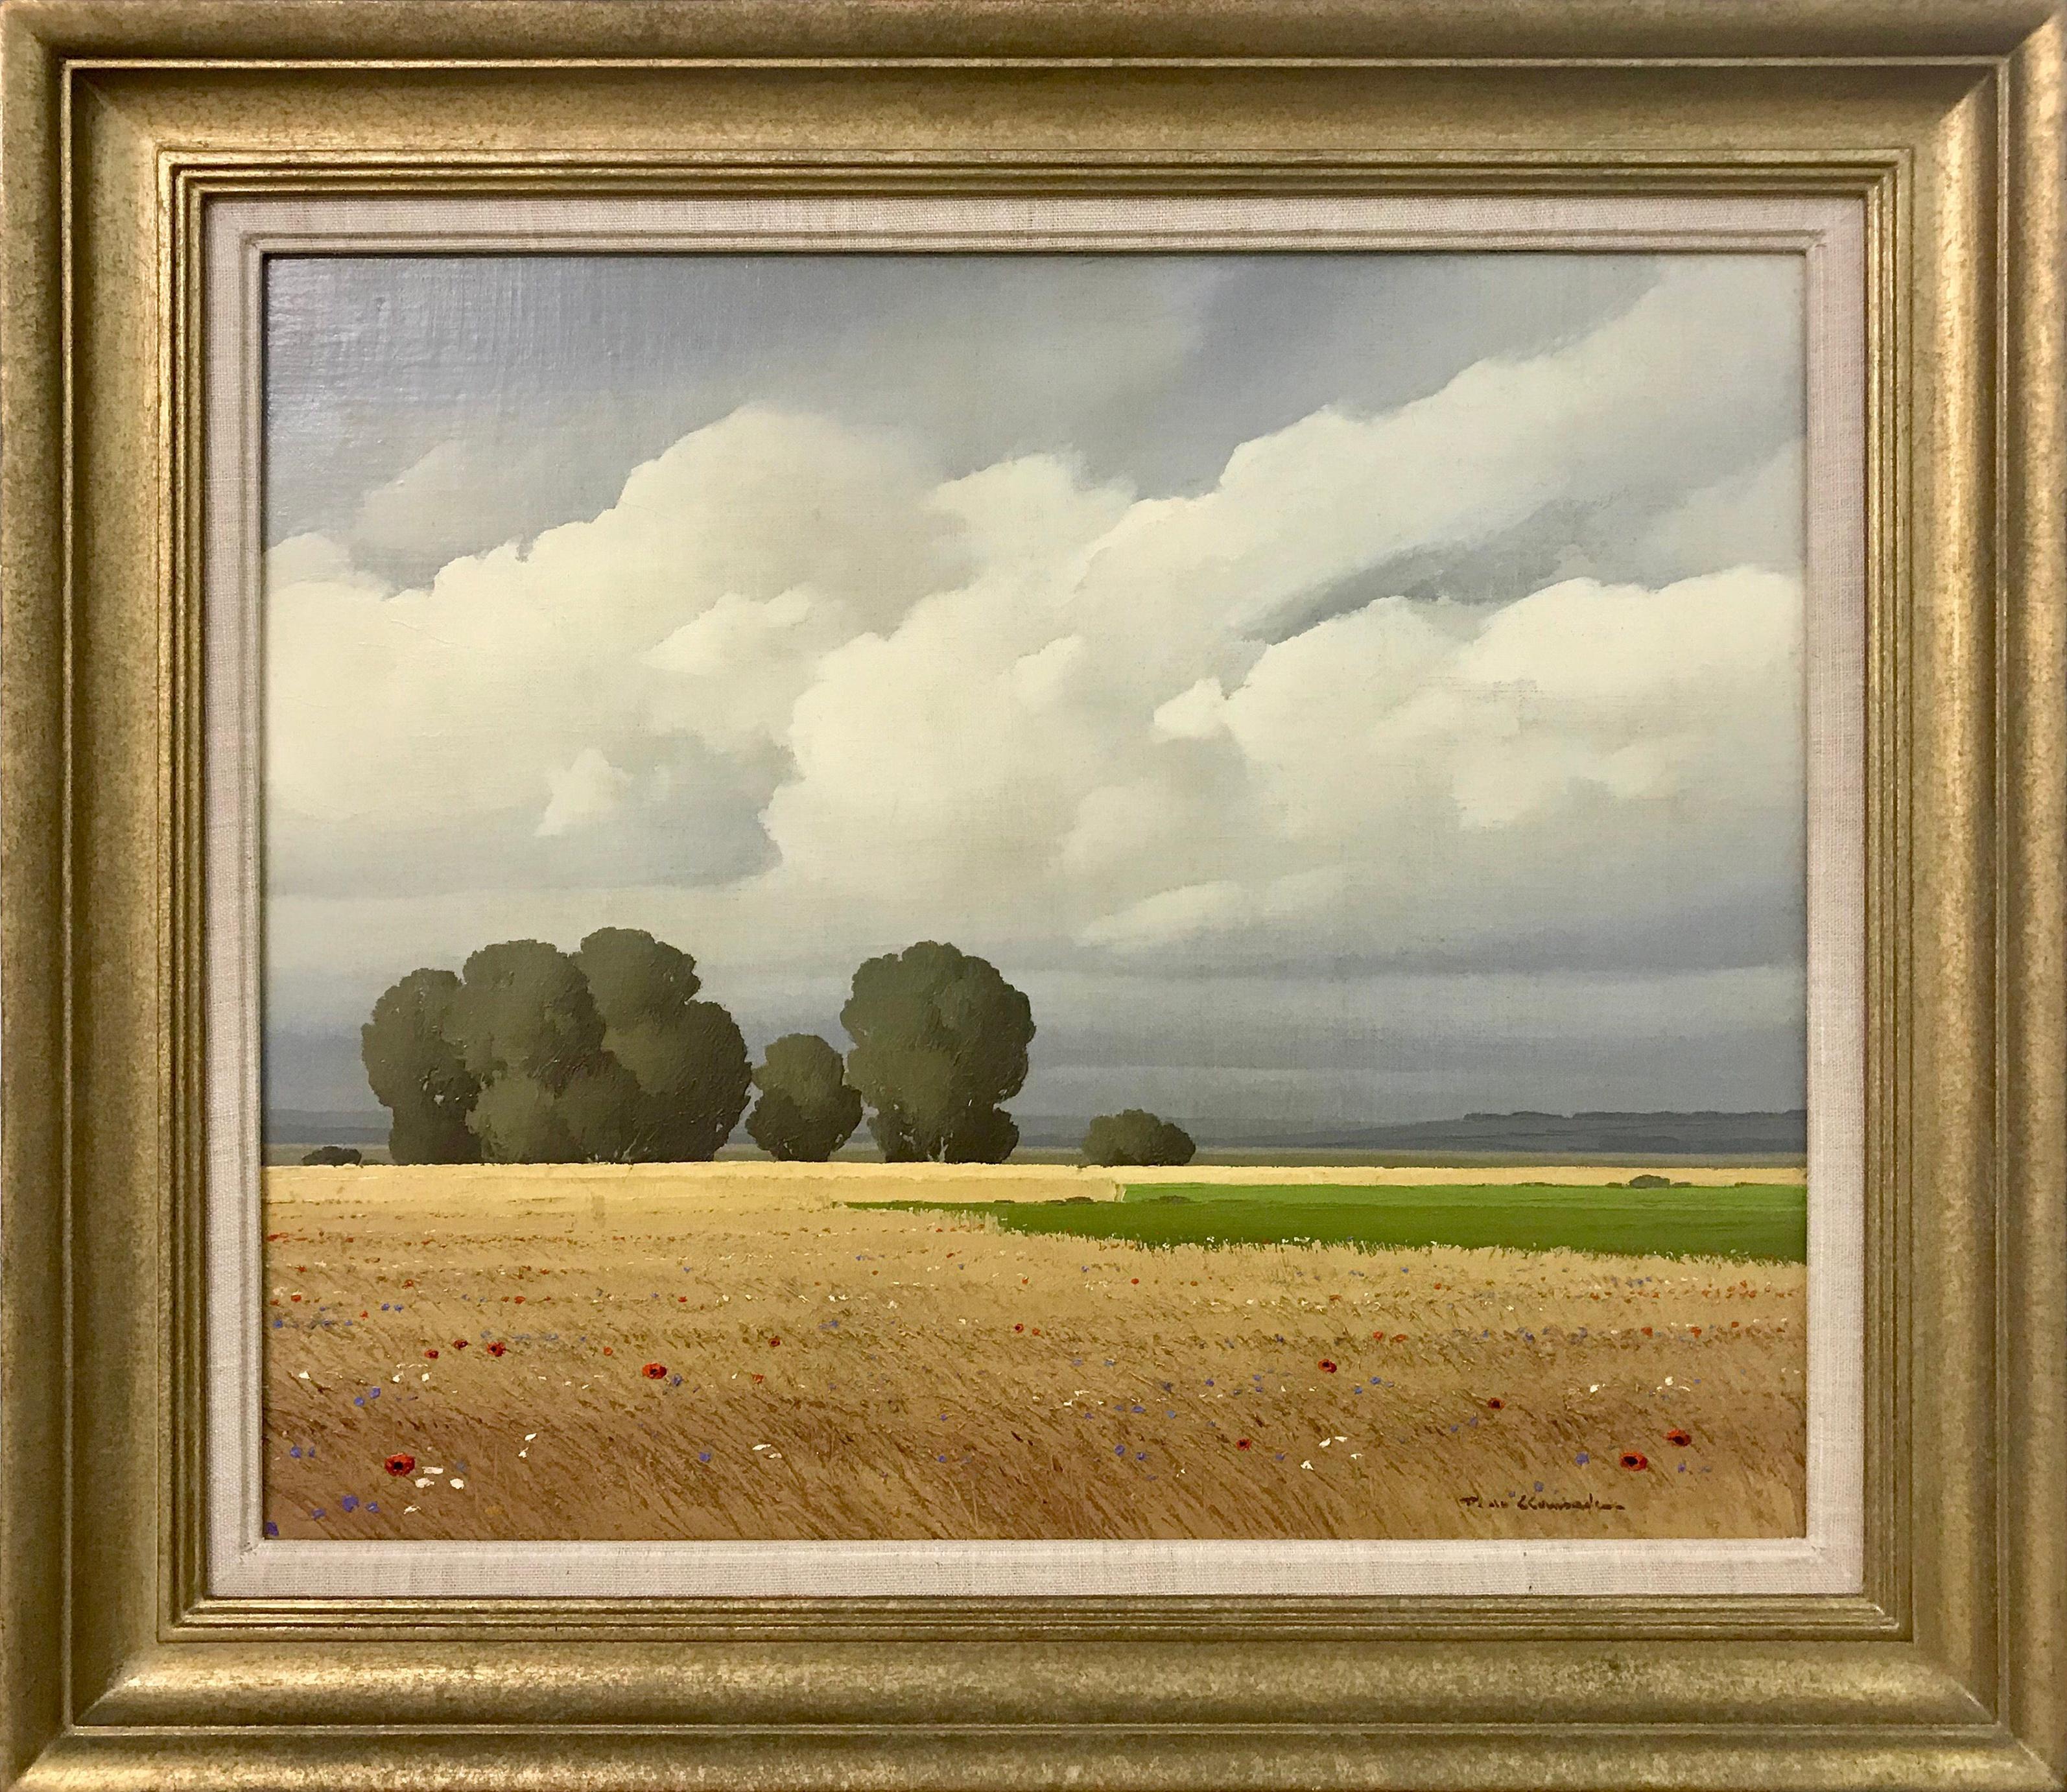 Pierre de Clausade Landscape Painting - Wheat Fields and Poppies with Clouds Landscape Oil Painting by French Artist